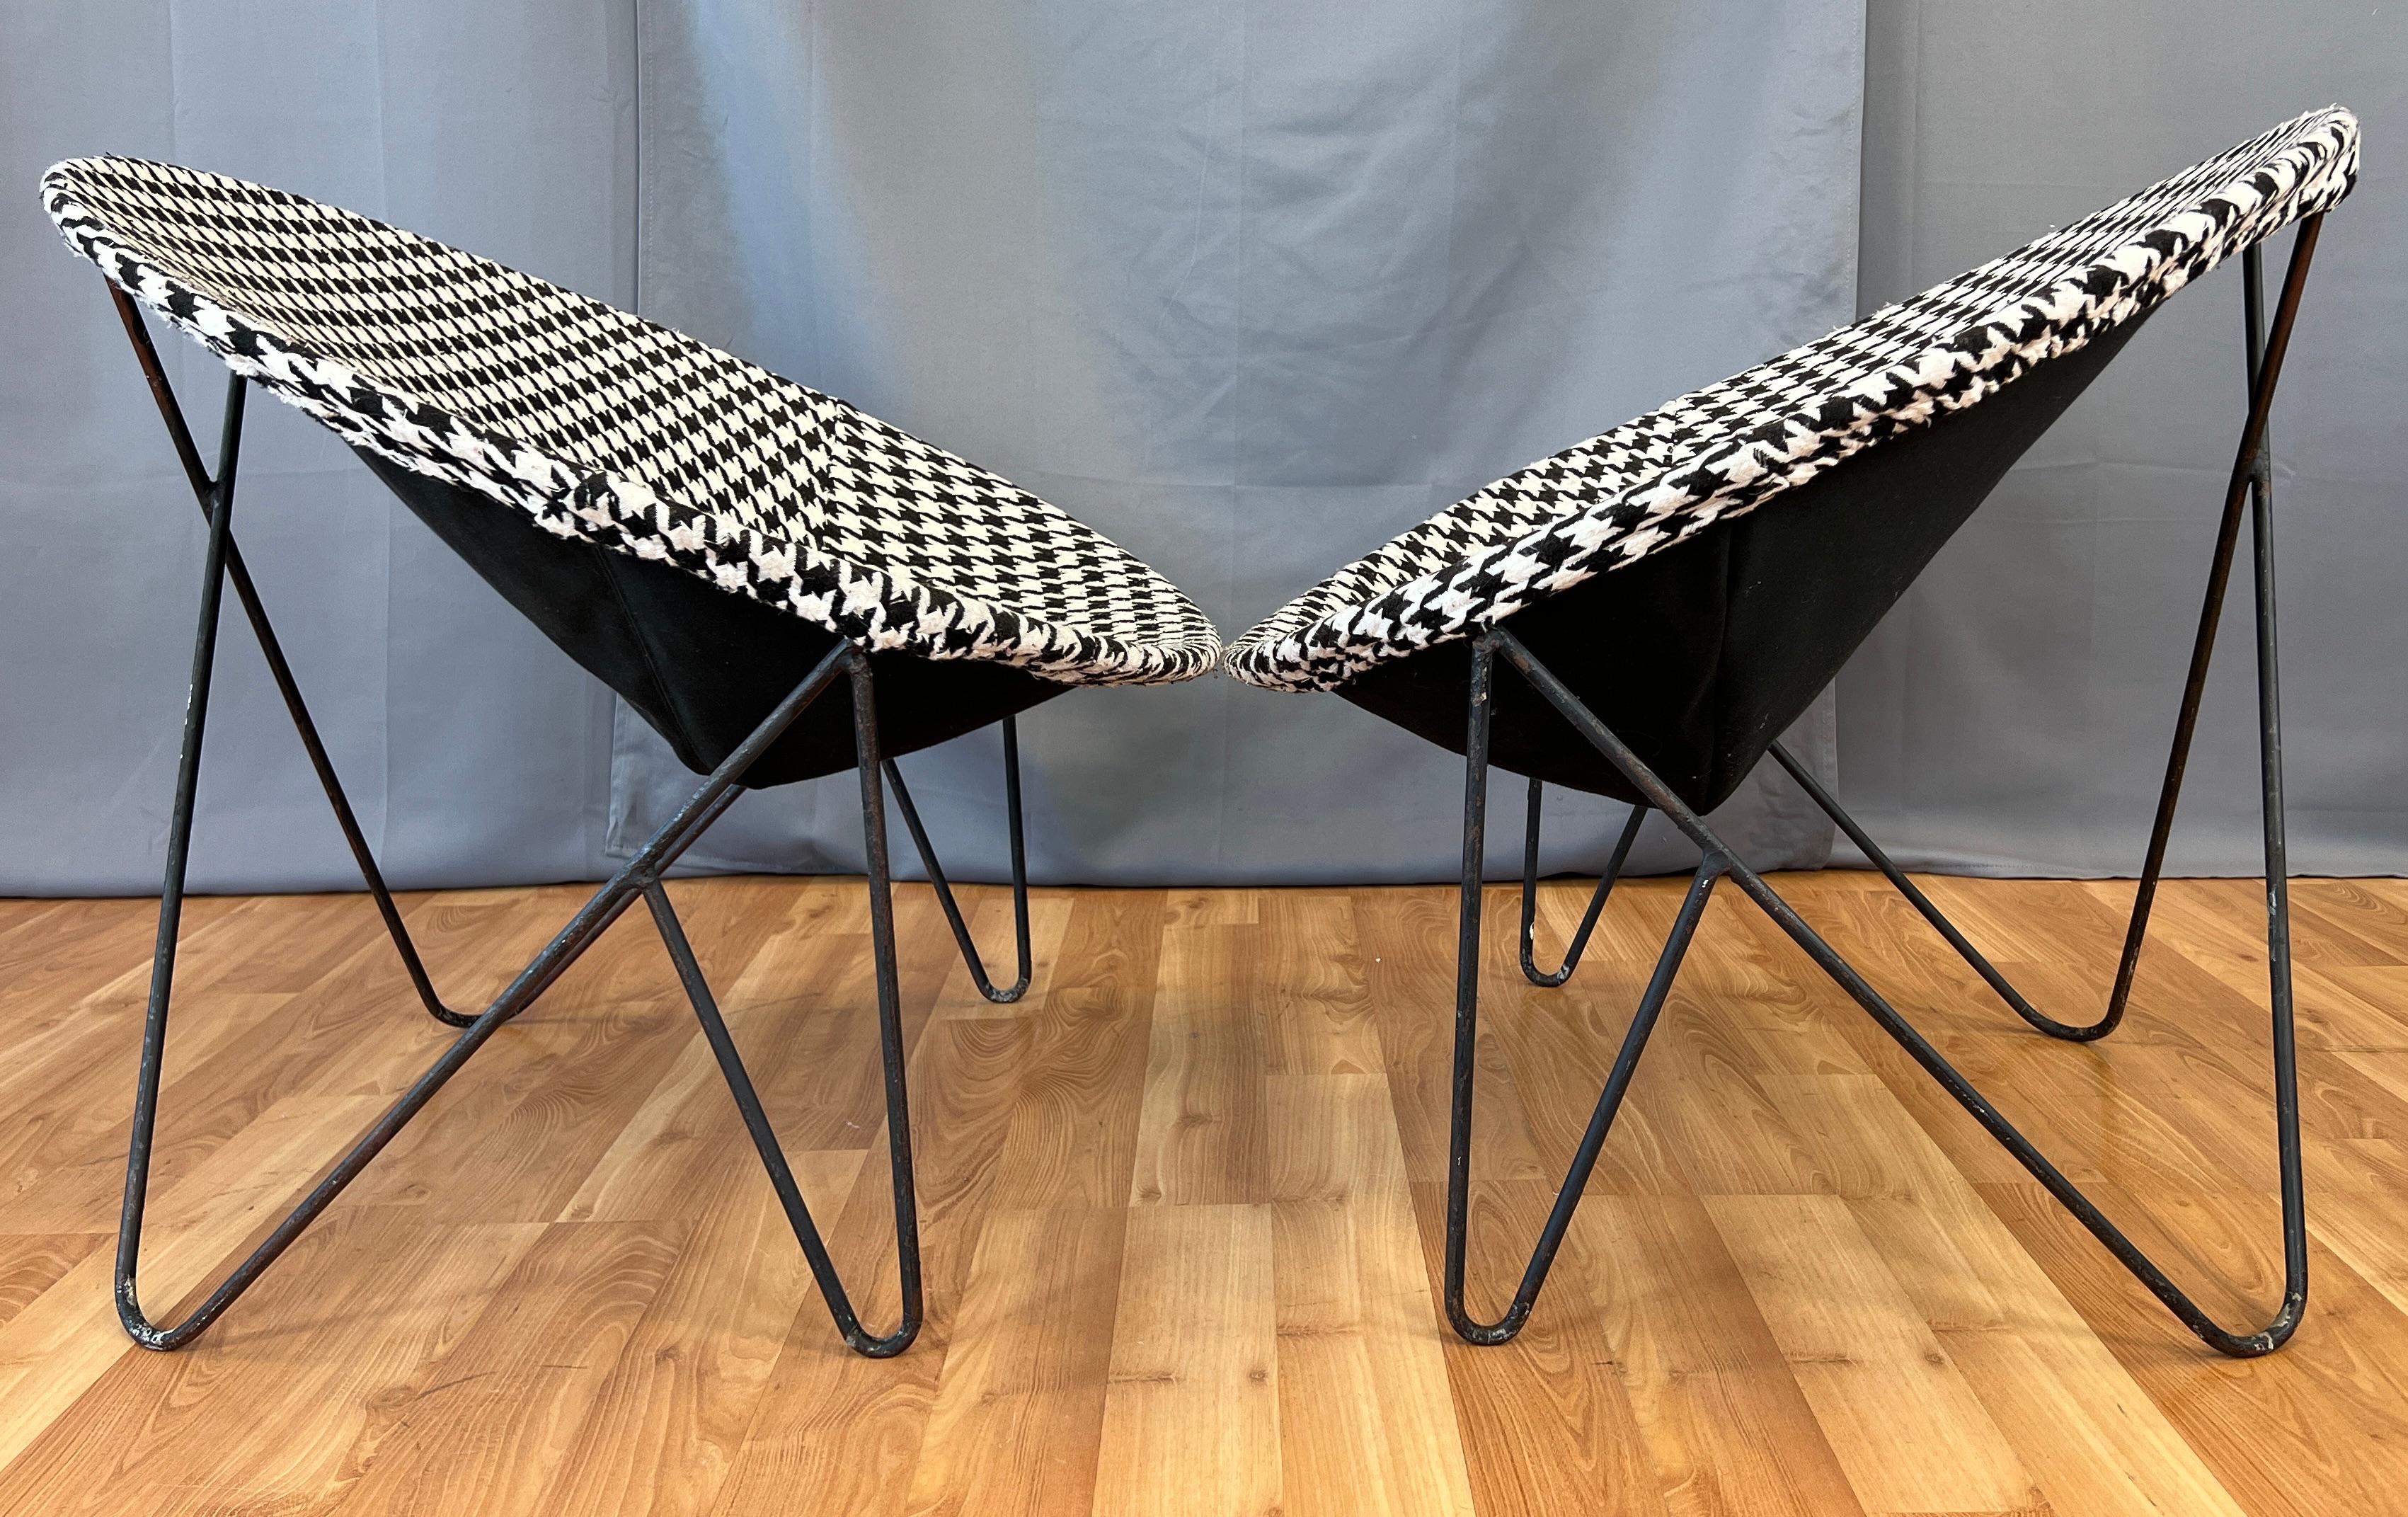 Pair of Mid-century 1950s Wrought Iron Hoop Chairs Black/White Upholstery  For Sale 1